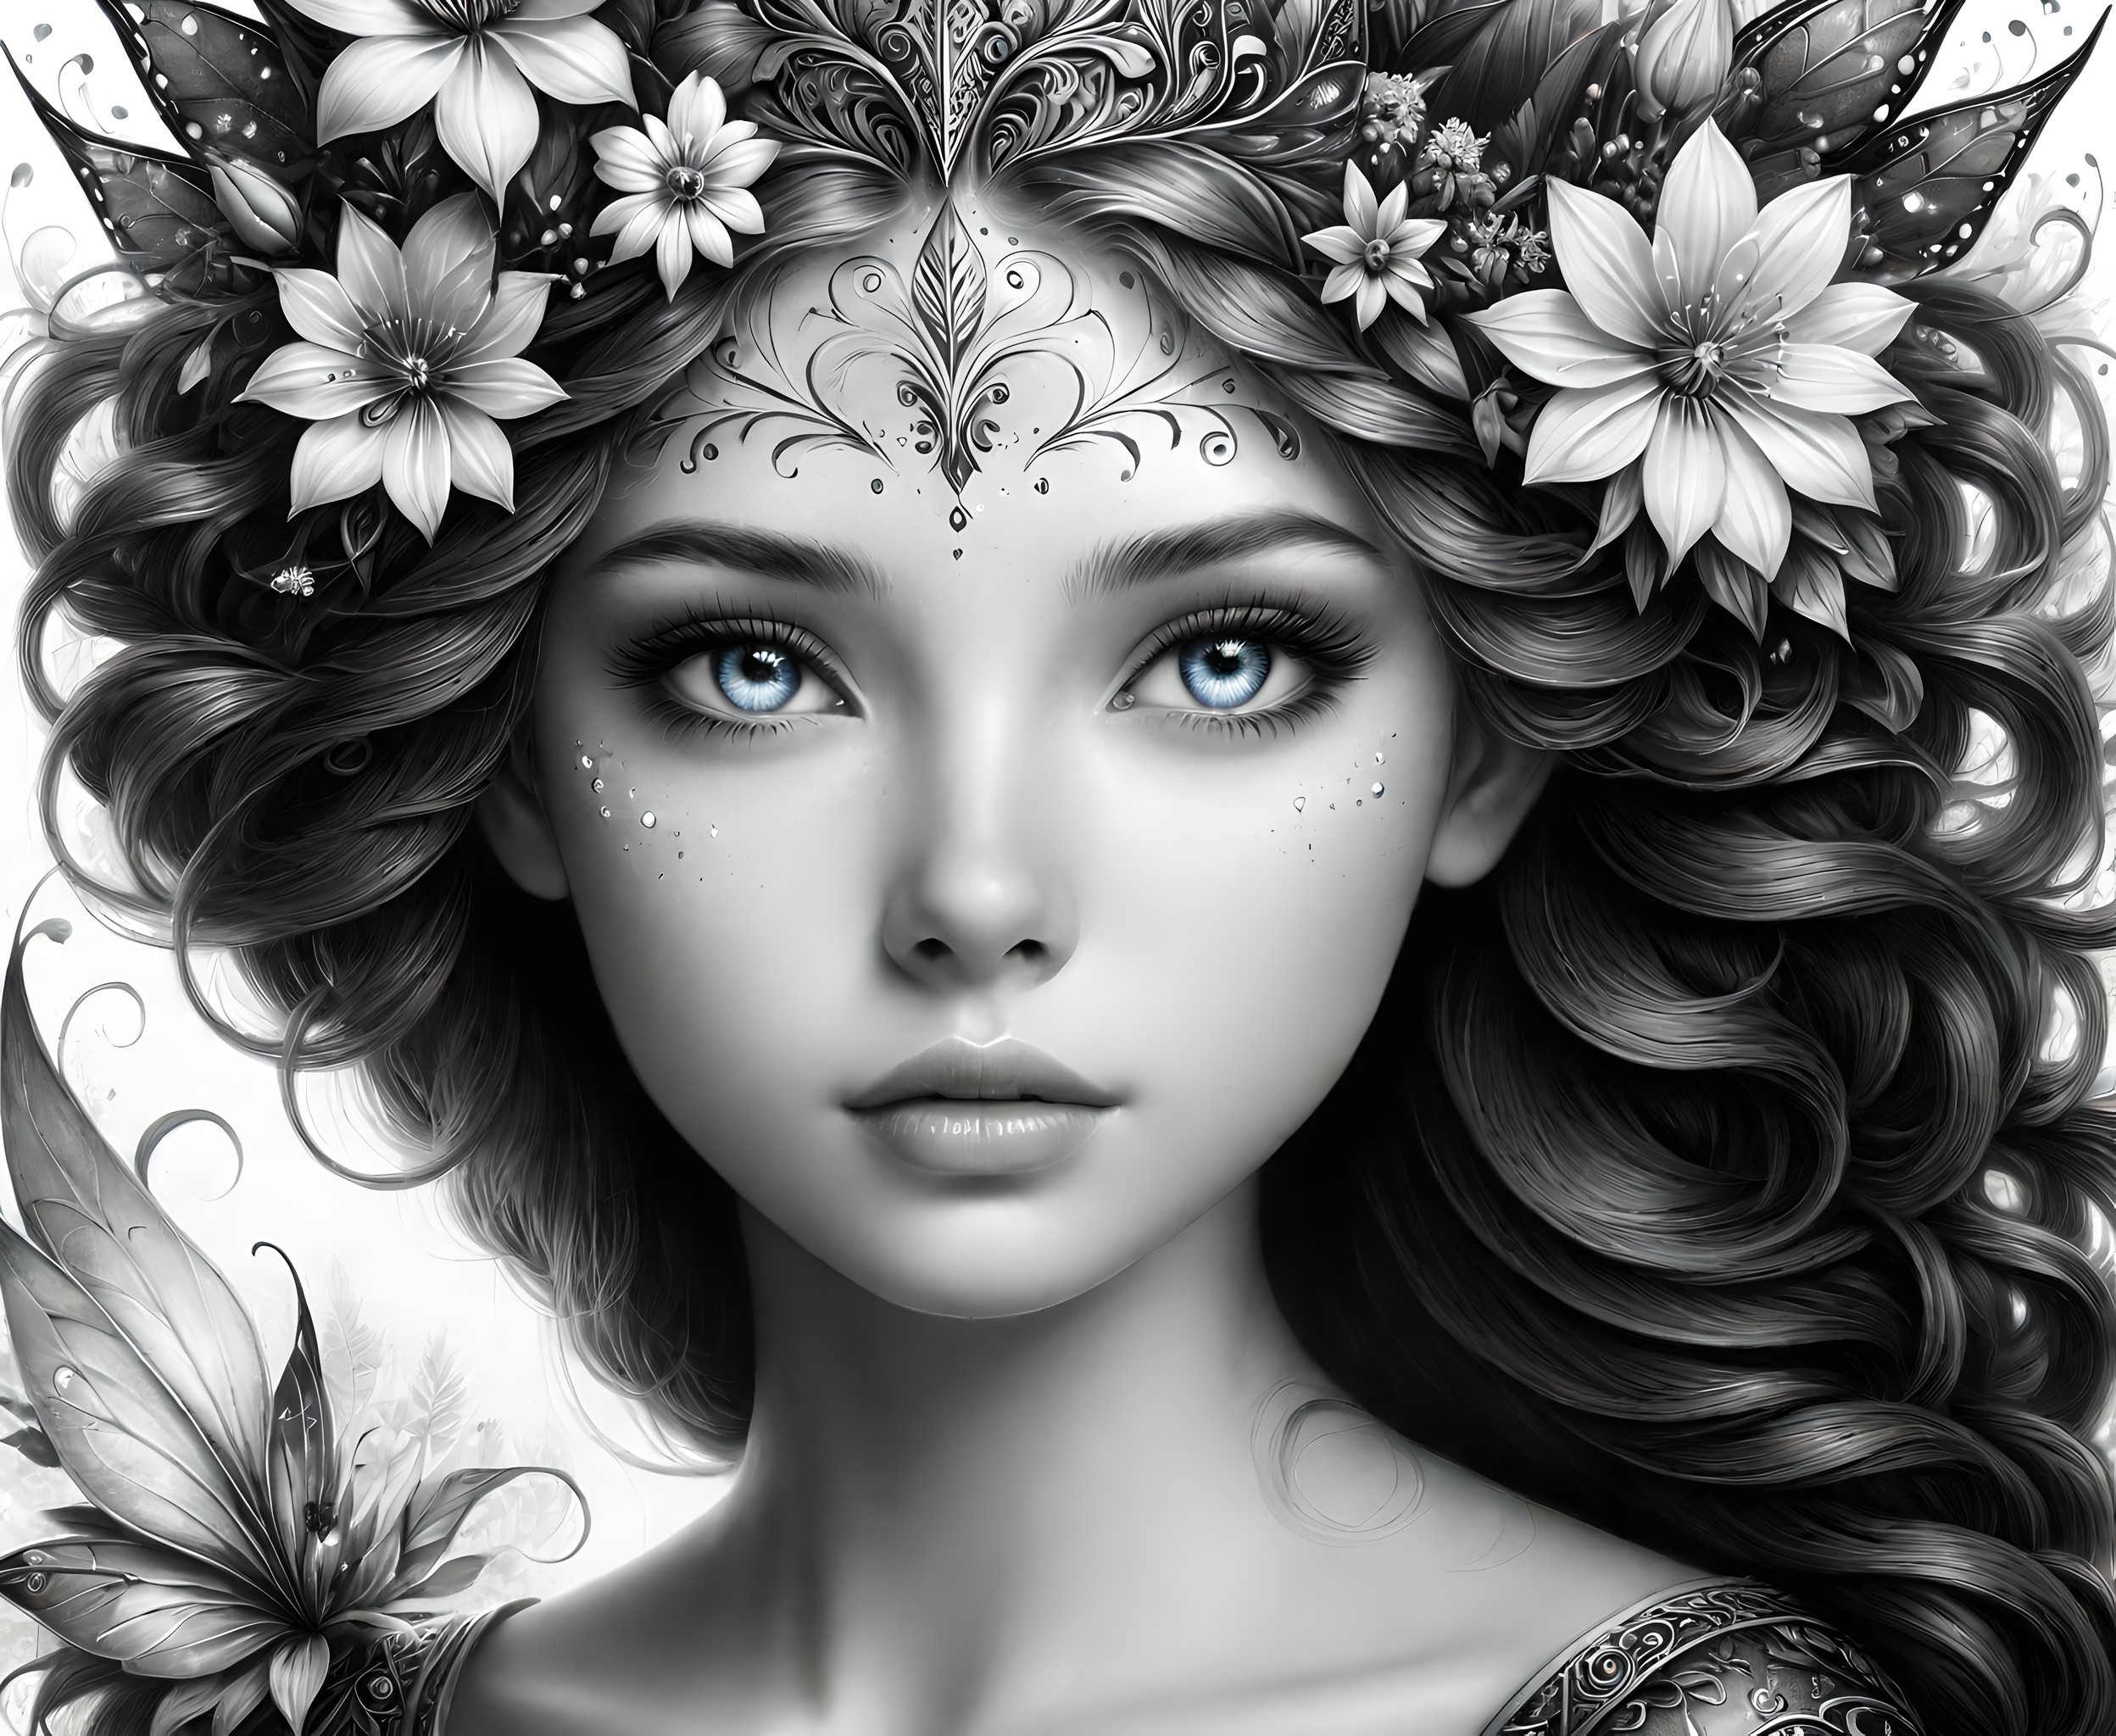 A digital painting of a woman with blue eyes and a flower crown.